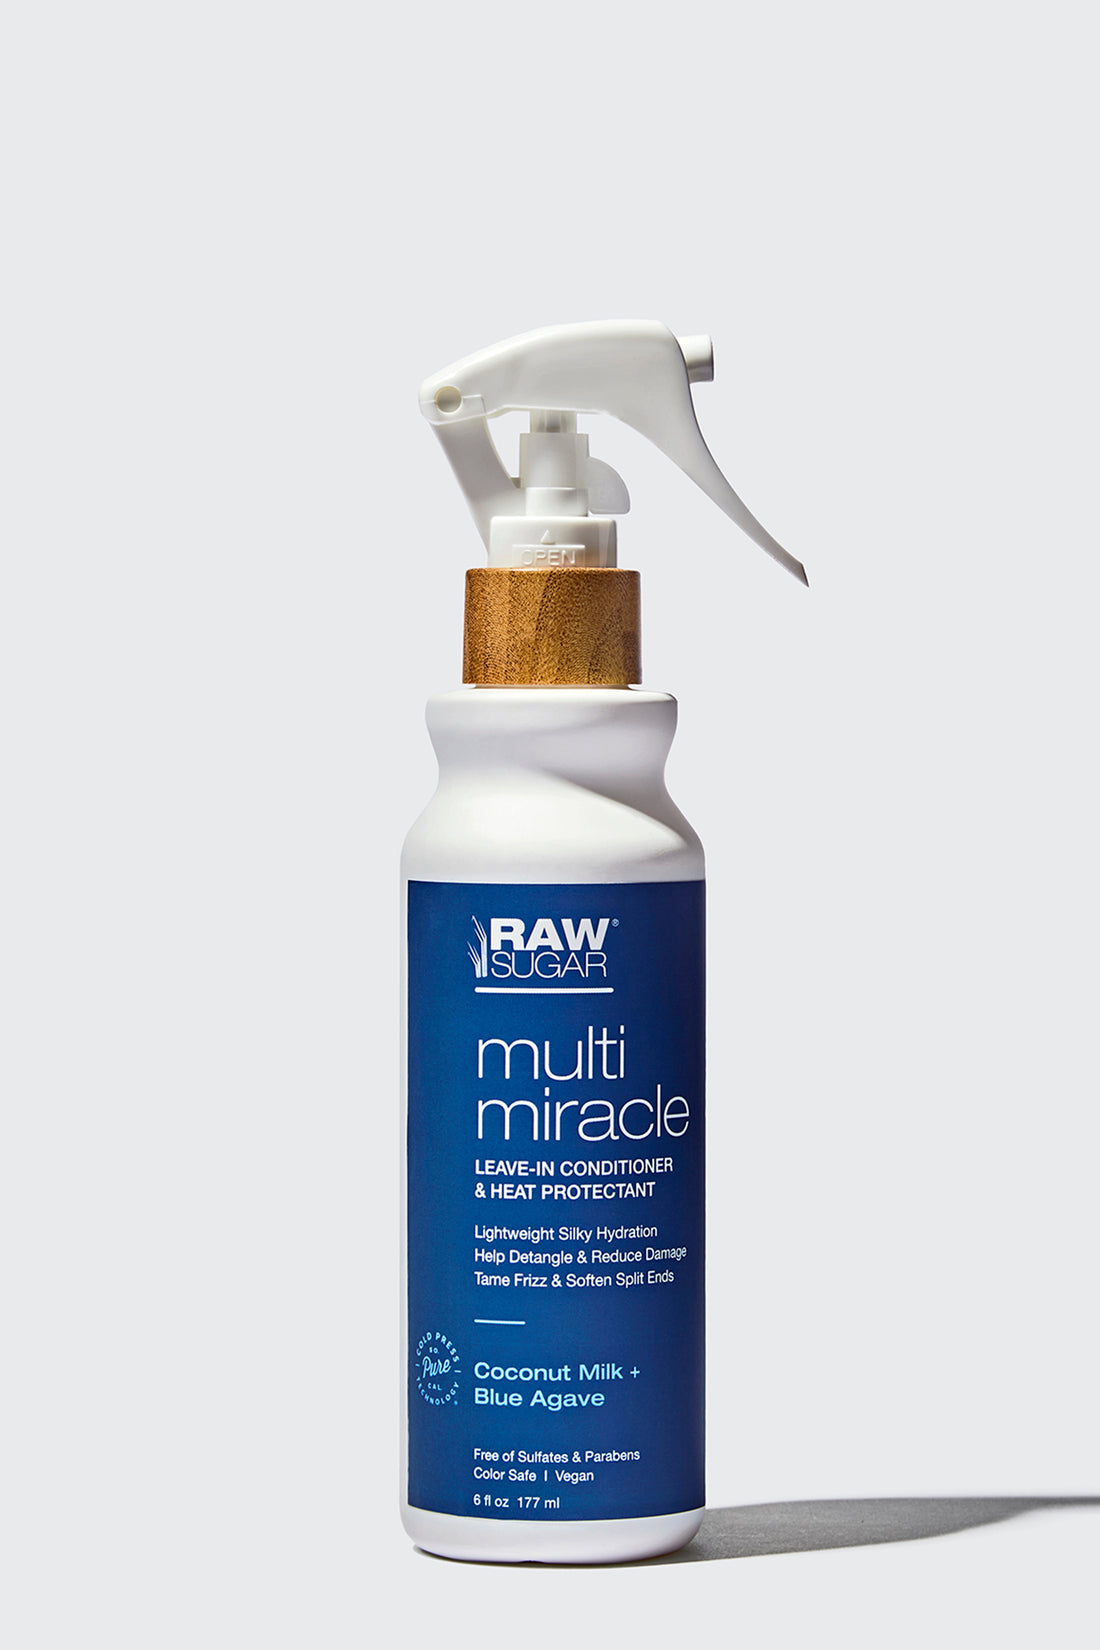 Multi-Miracle Hair Mist 6 oz | Leave-In Conditioner & Heat Protectant | Coconut Milk + Blue Agave